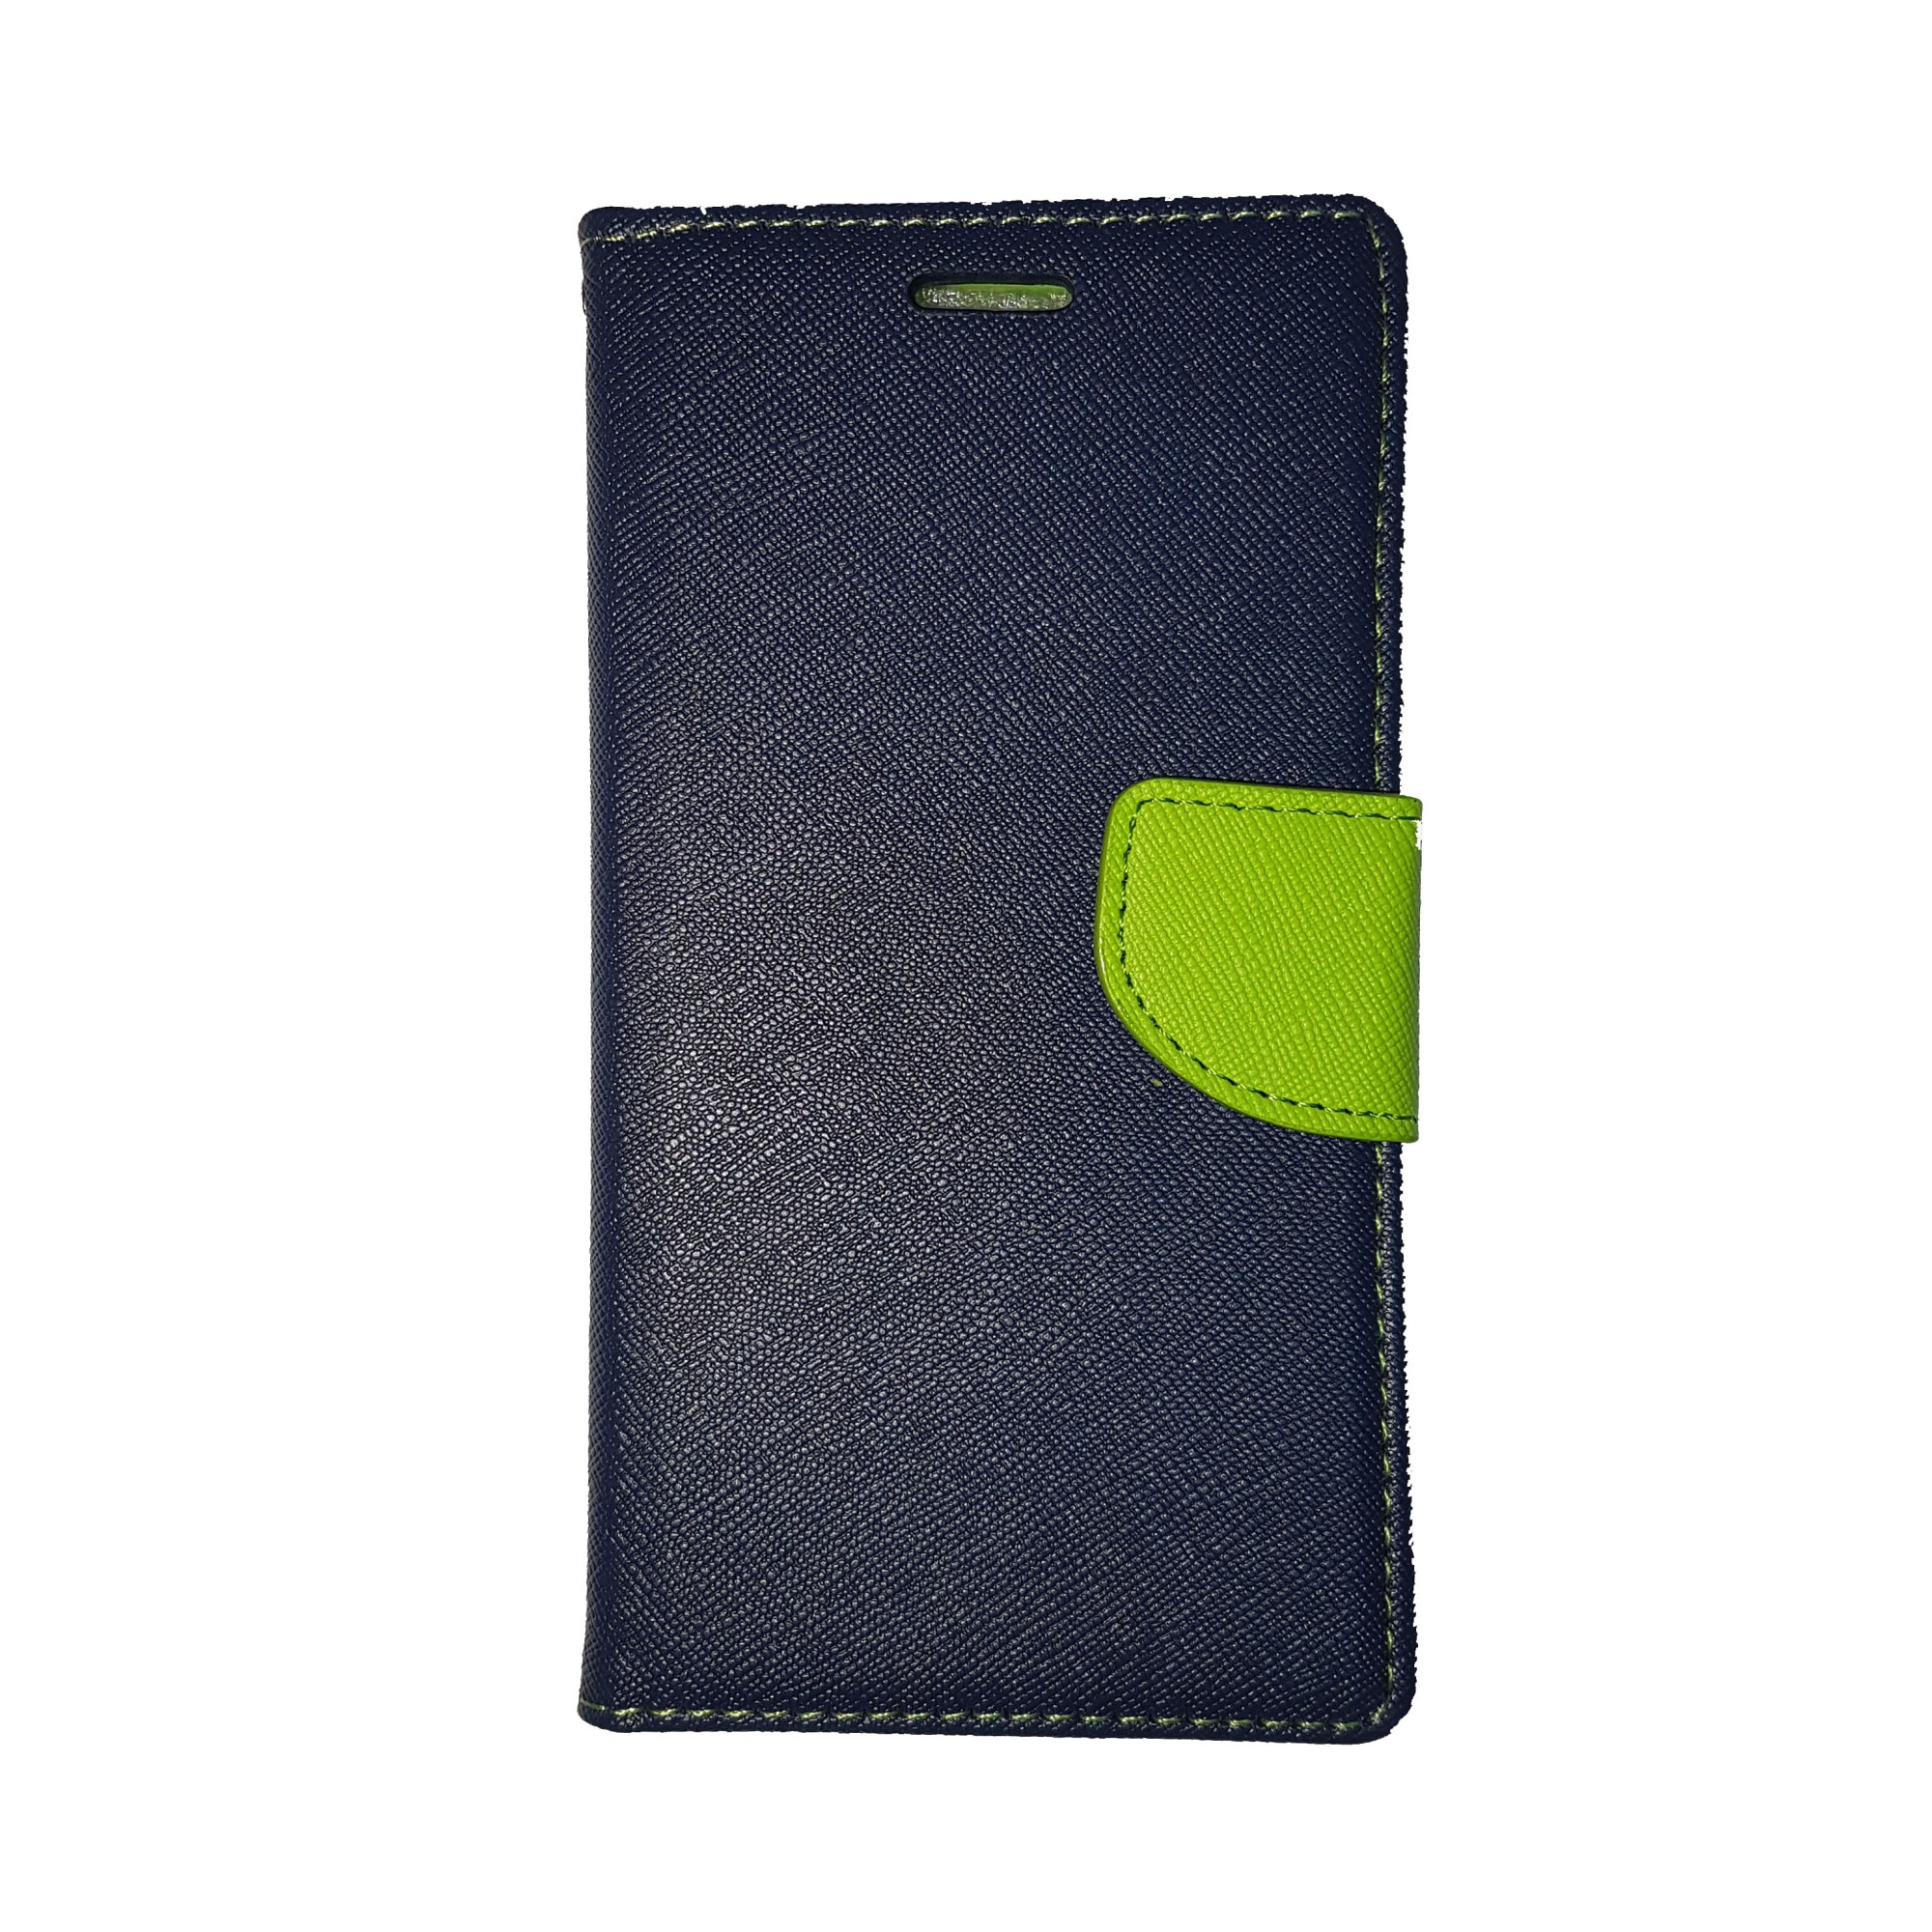 Turns into Troublesome Kilometers Husa Pentru Huawei Mate S, Fancy Case Navy Blue, interior Lime - eMAG.ro